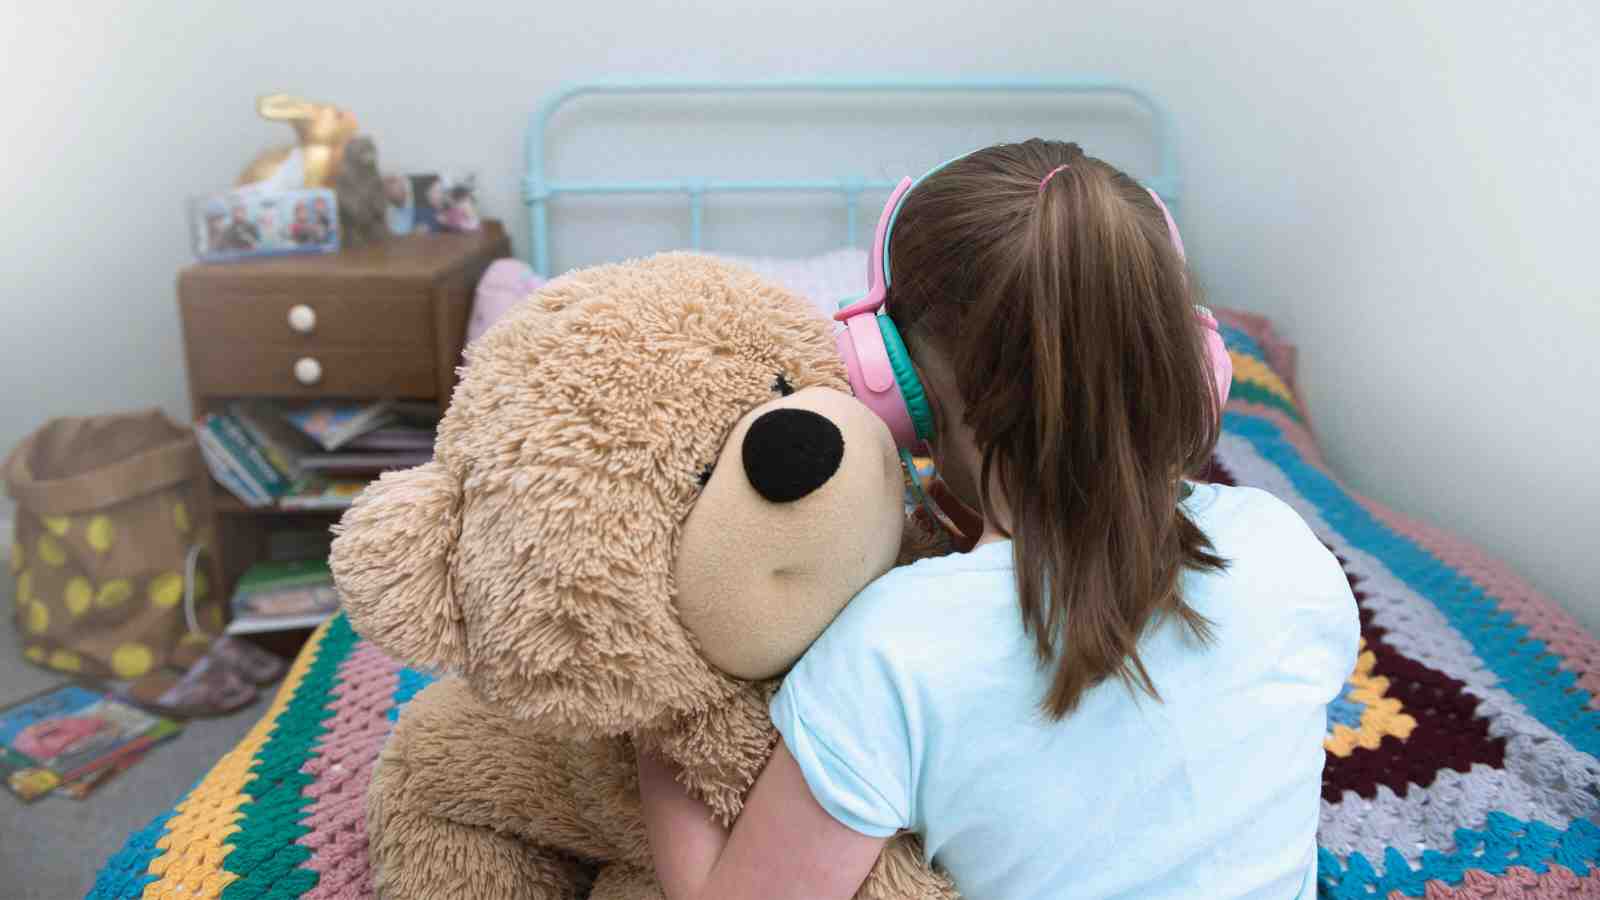 Girl holding her stuffed teddy bear toy while sitting on her bed